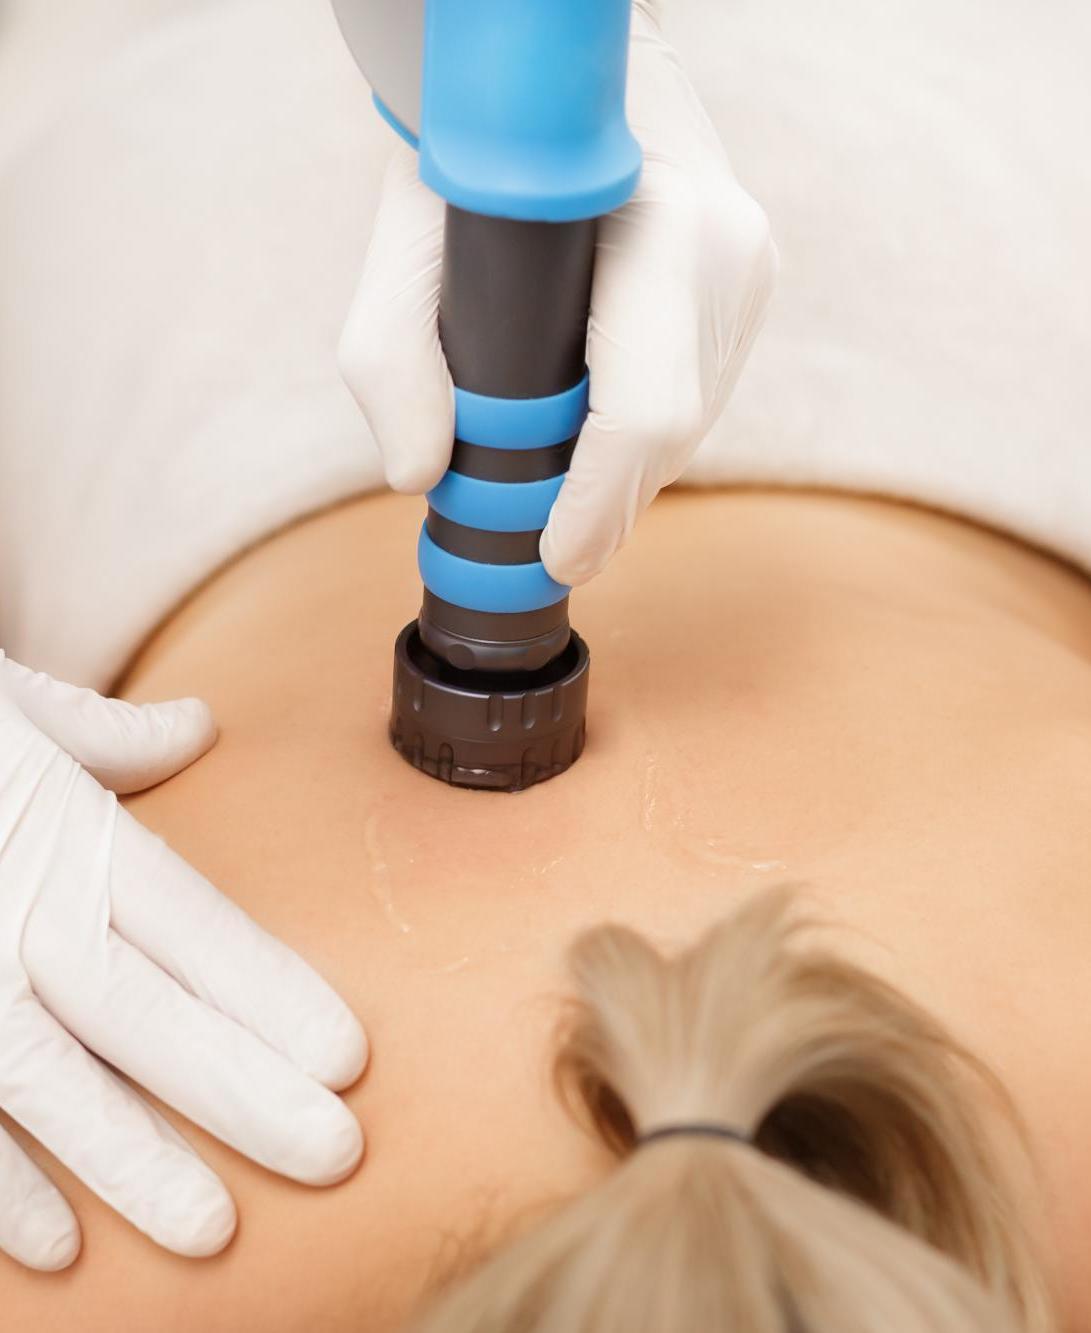 https://www.lopt.com/sites/default/files/styles/free_crop/public/images/lopt-shockwave-therapy.jpg?h=03ad54b5&itok=WsezRksv